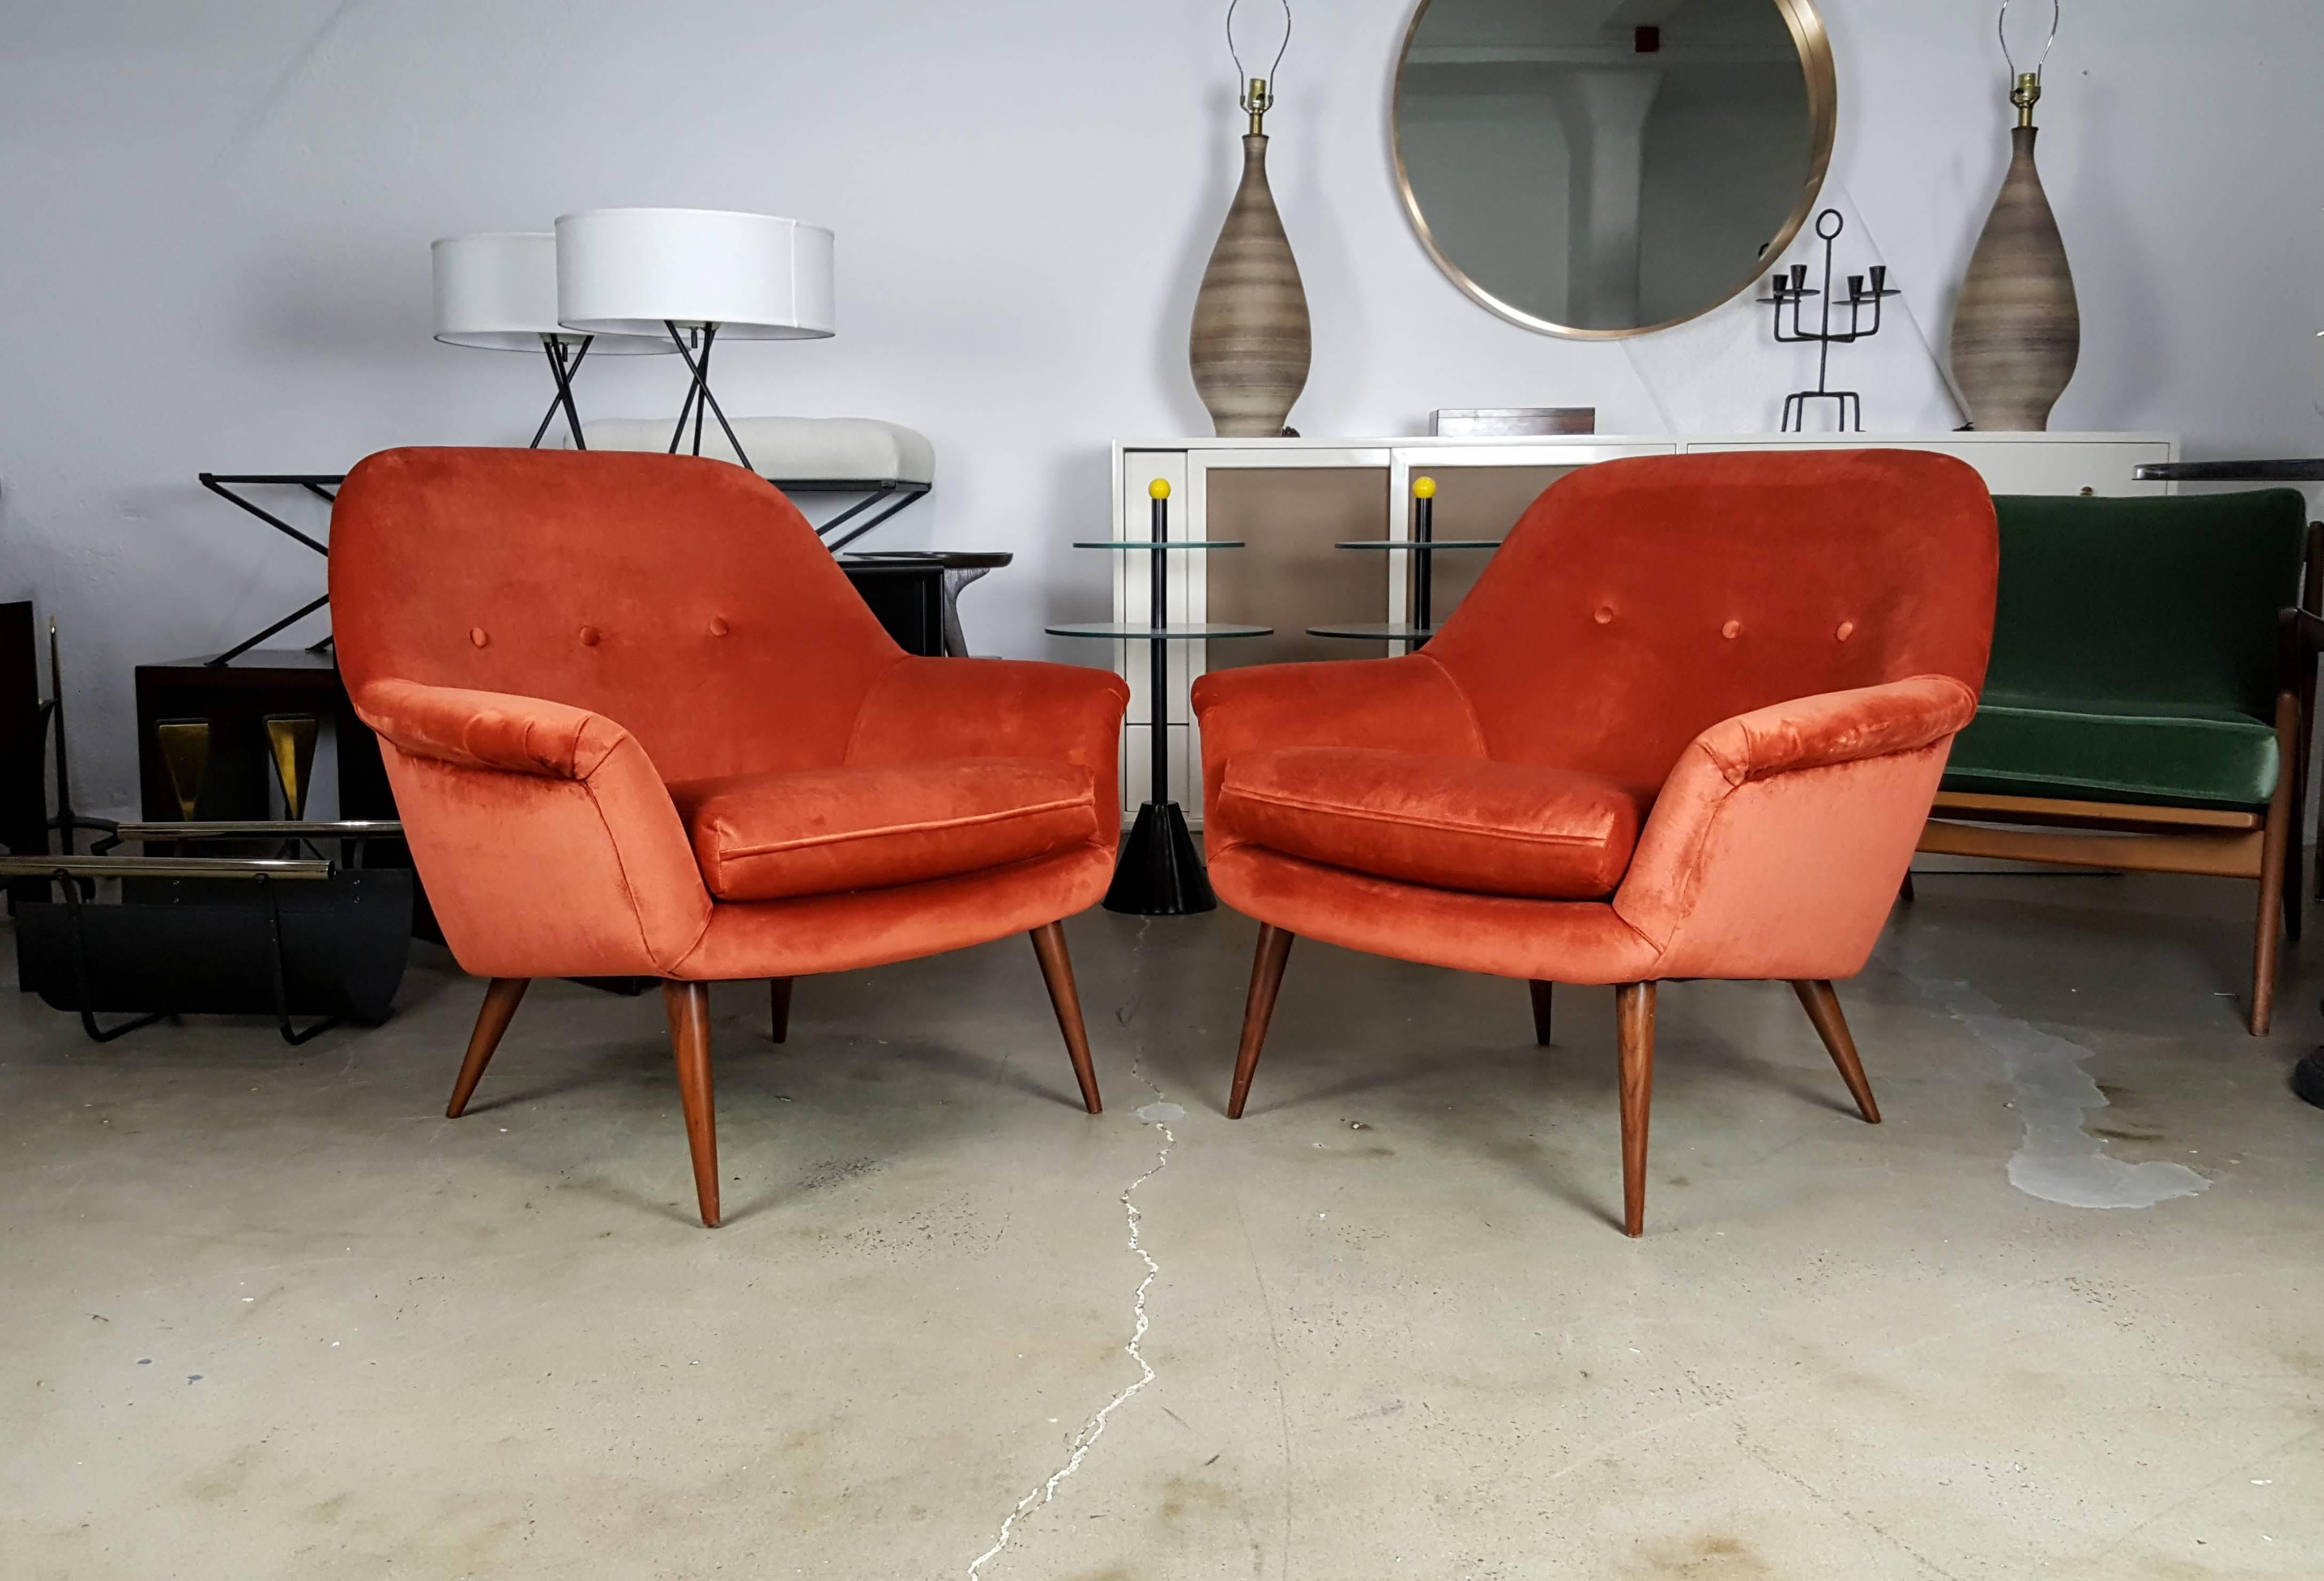 Pair of Italian modern lounge chairs in persimmon velvet. So comfortable and excellent quality.

See this item in our private NYC showroom! Refine Limited is located in the heart of Chelsea at the history Starrett-LeHigh Building, 601 West 26th